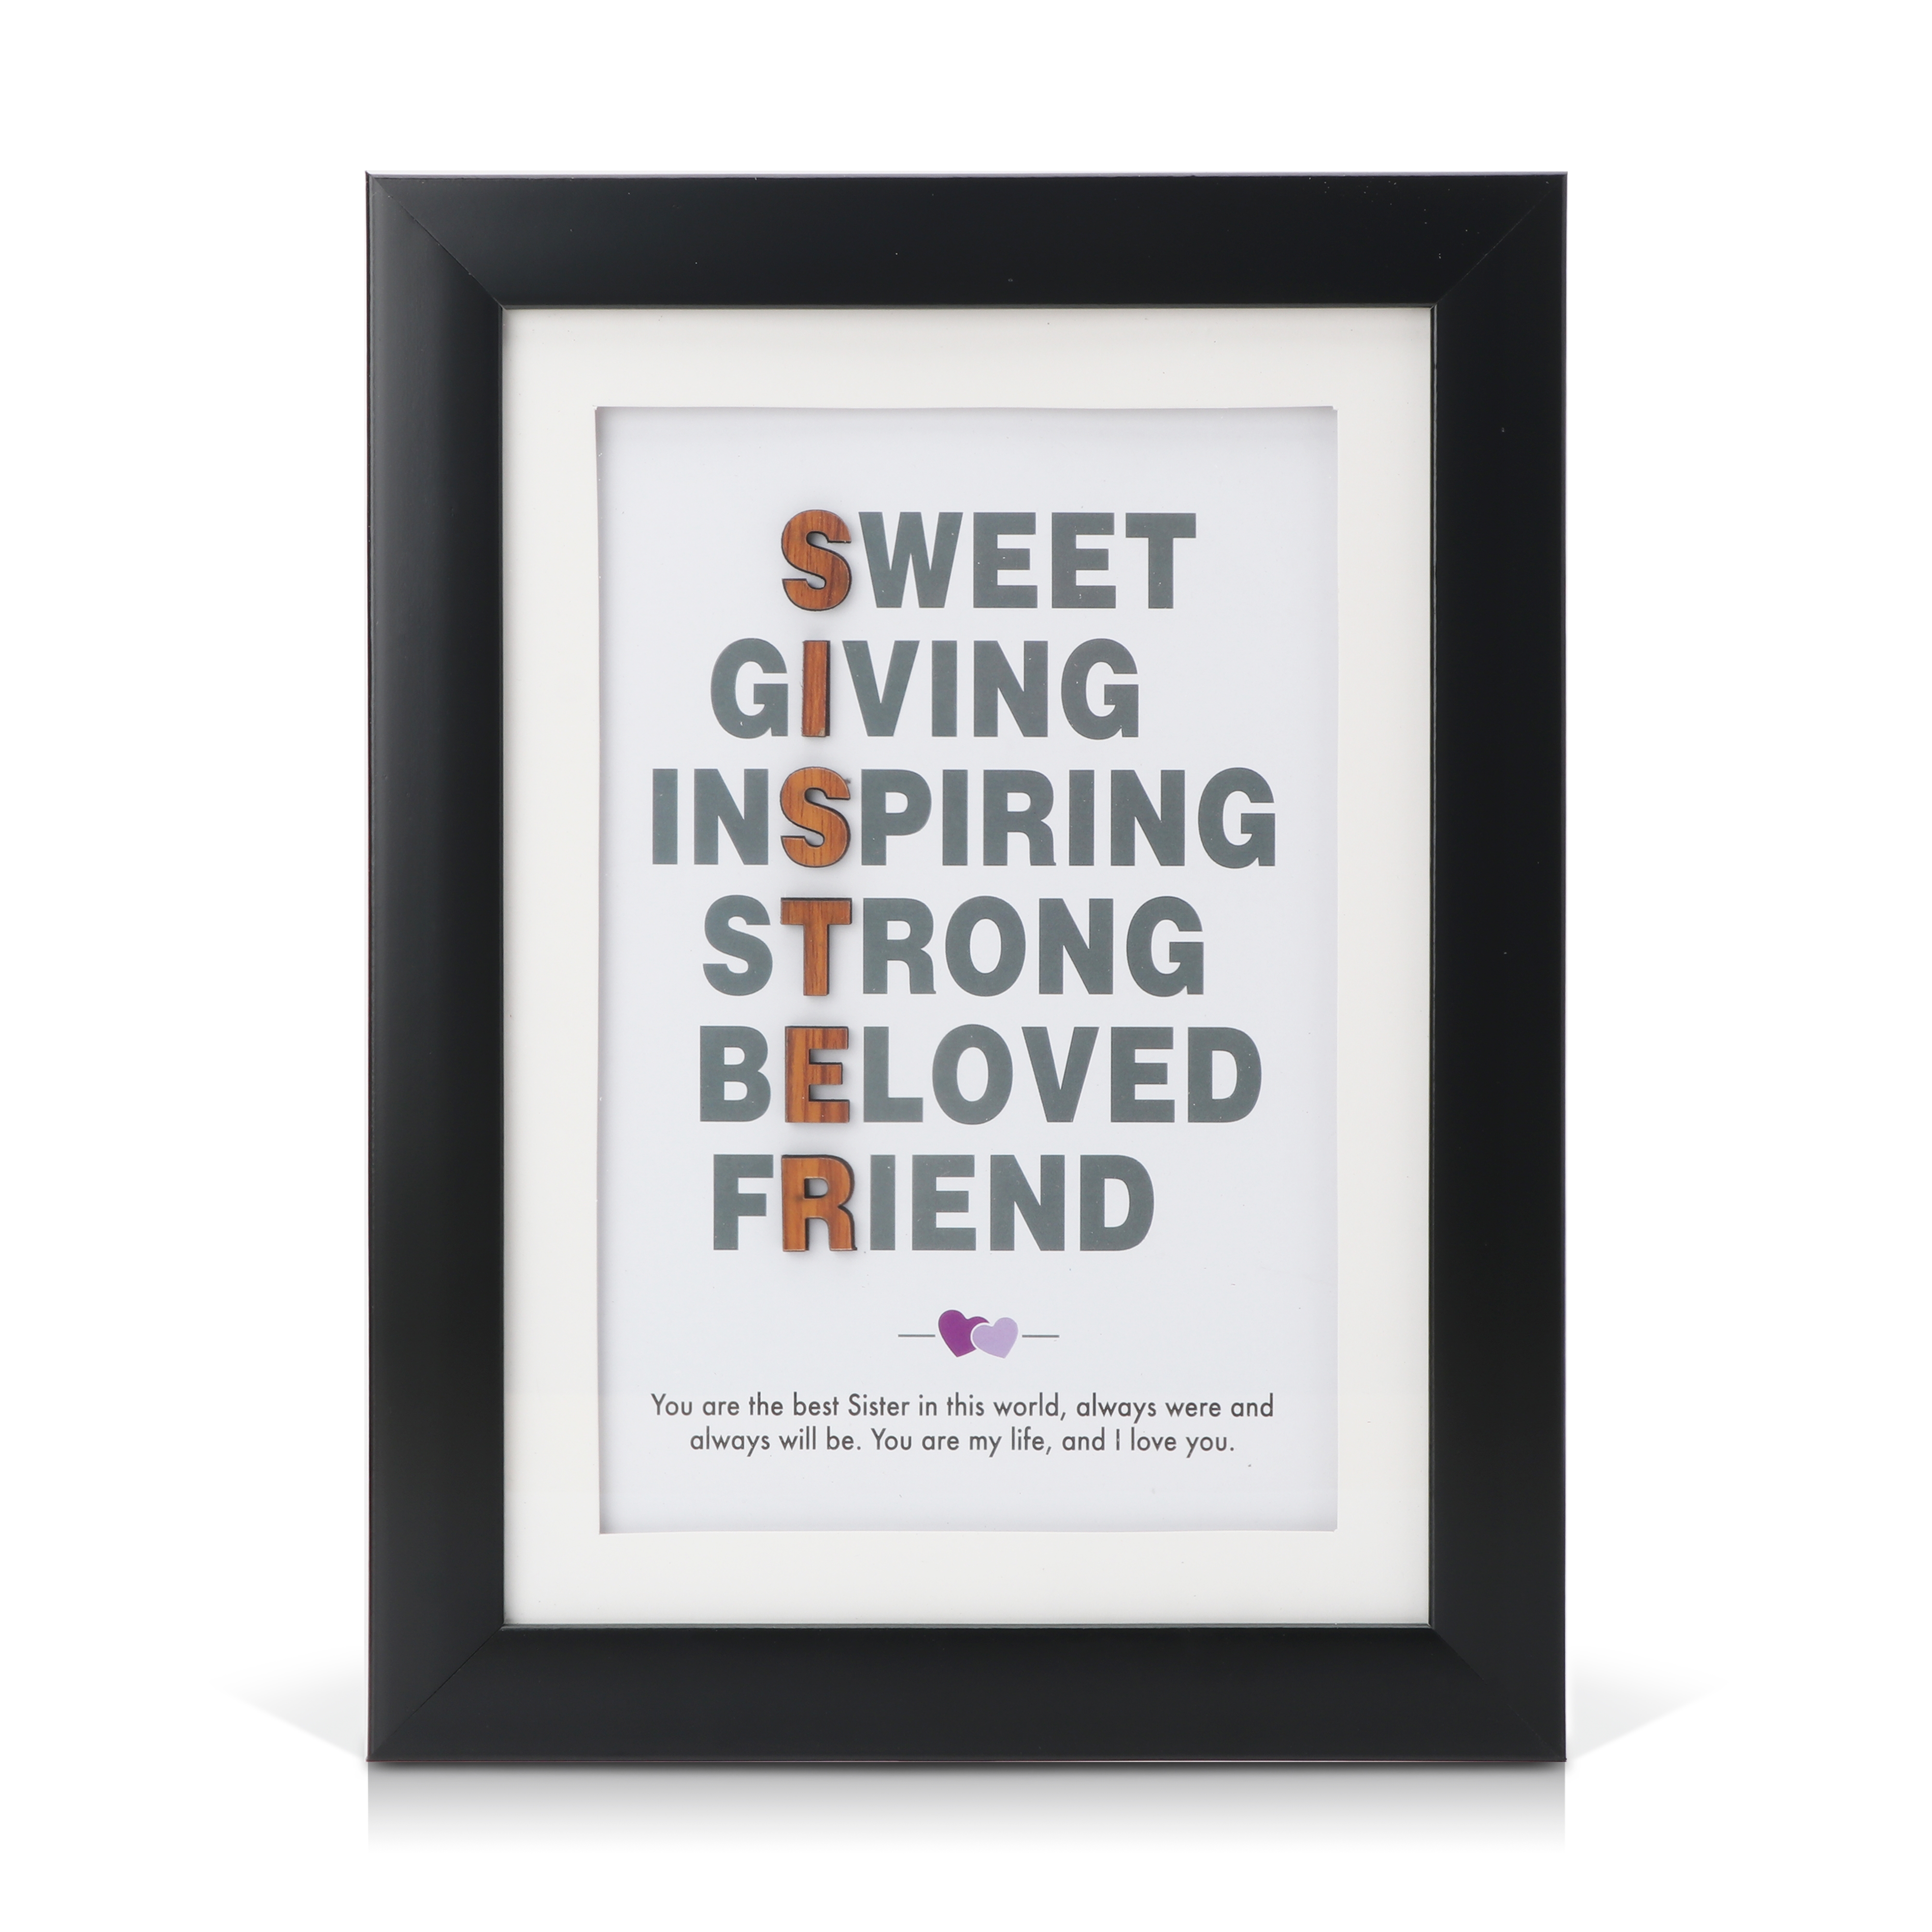 Archies | Archies Quotation Photo Frame with Greeting Card for Sister